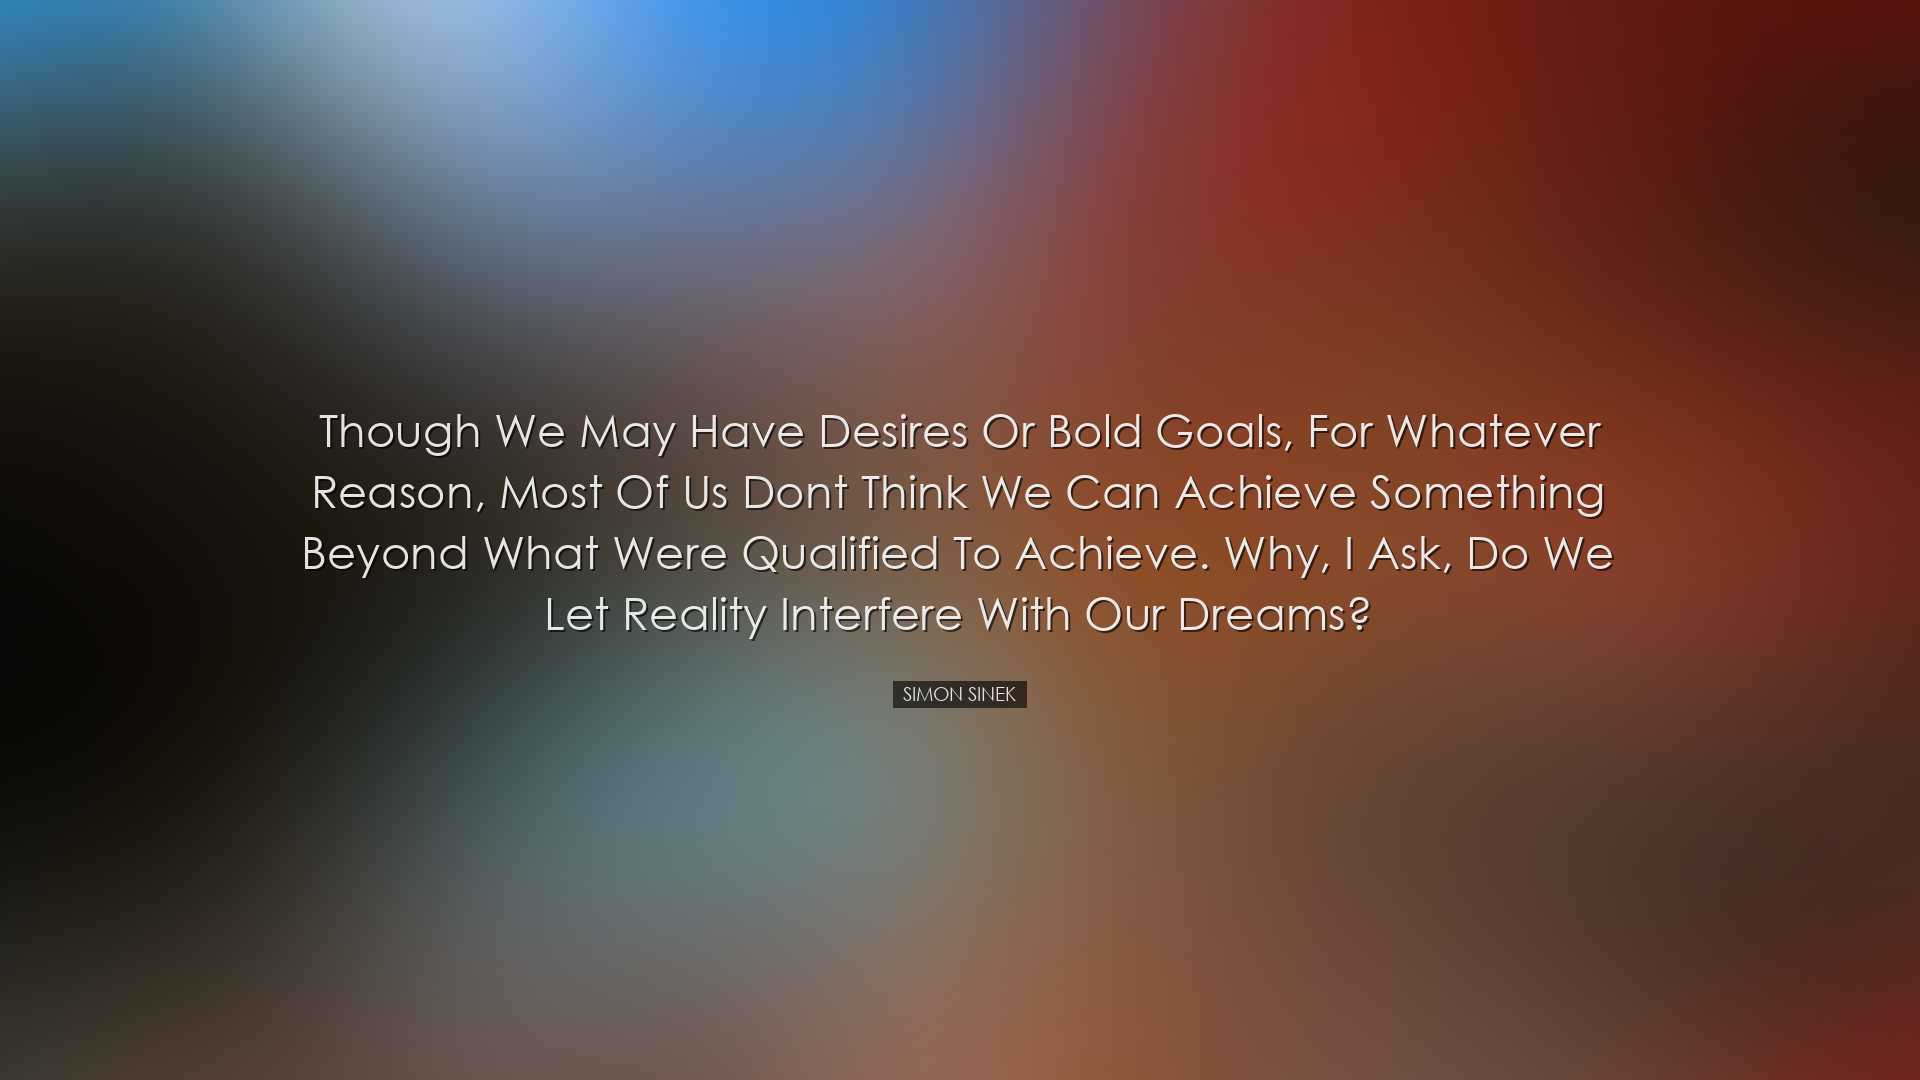 Though we may have desires or bold goals, for whatever reason, mos